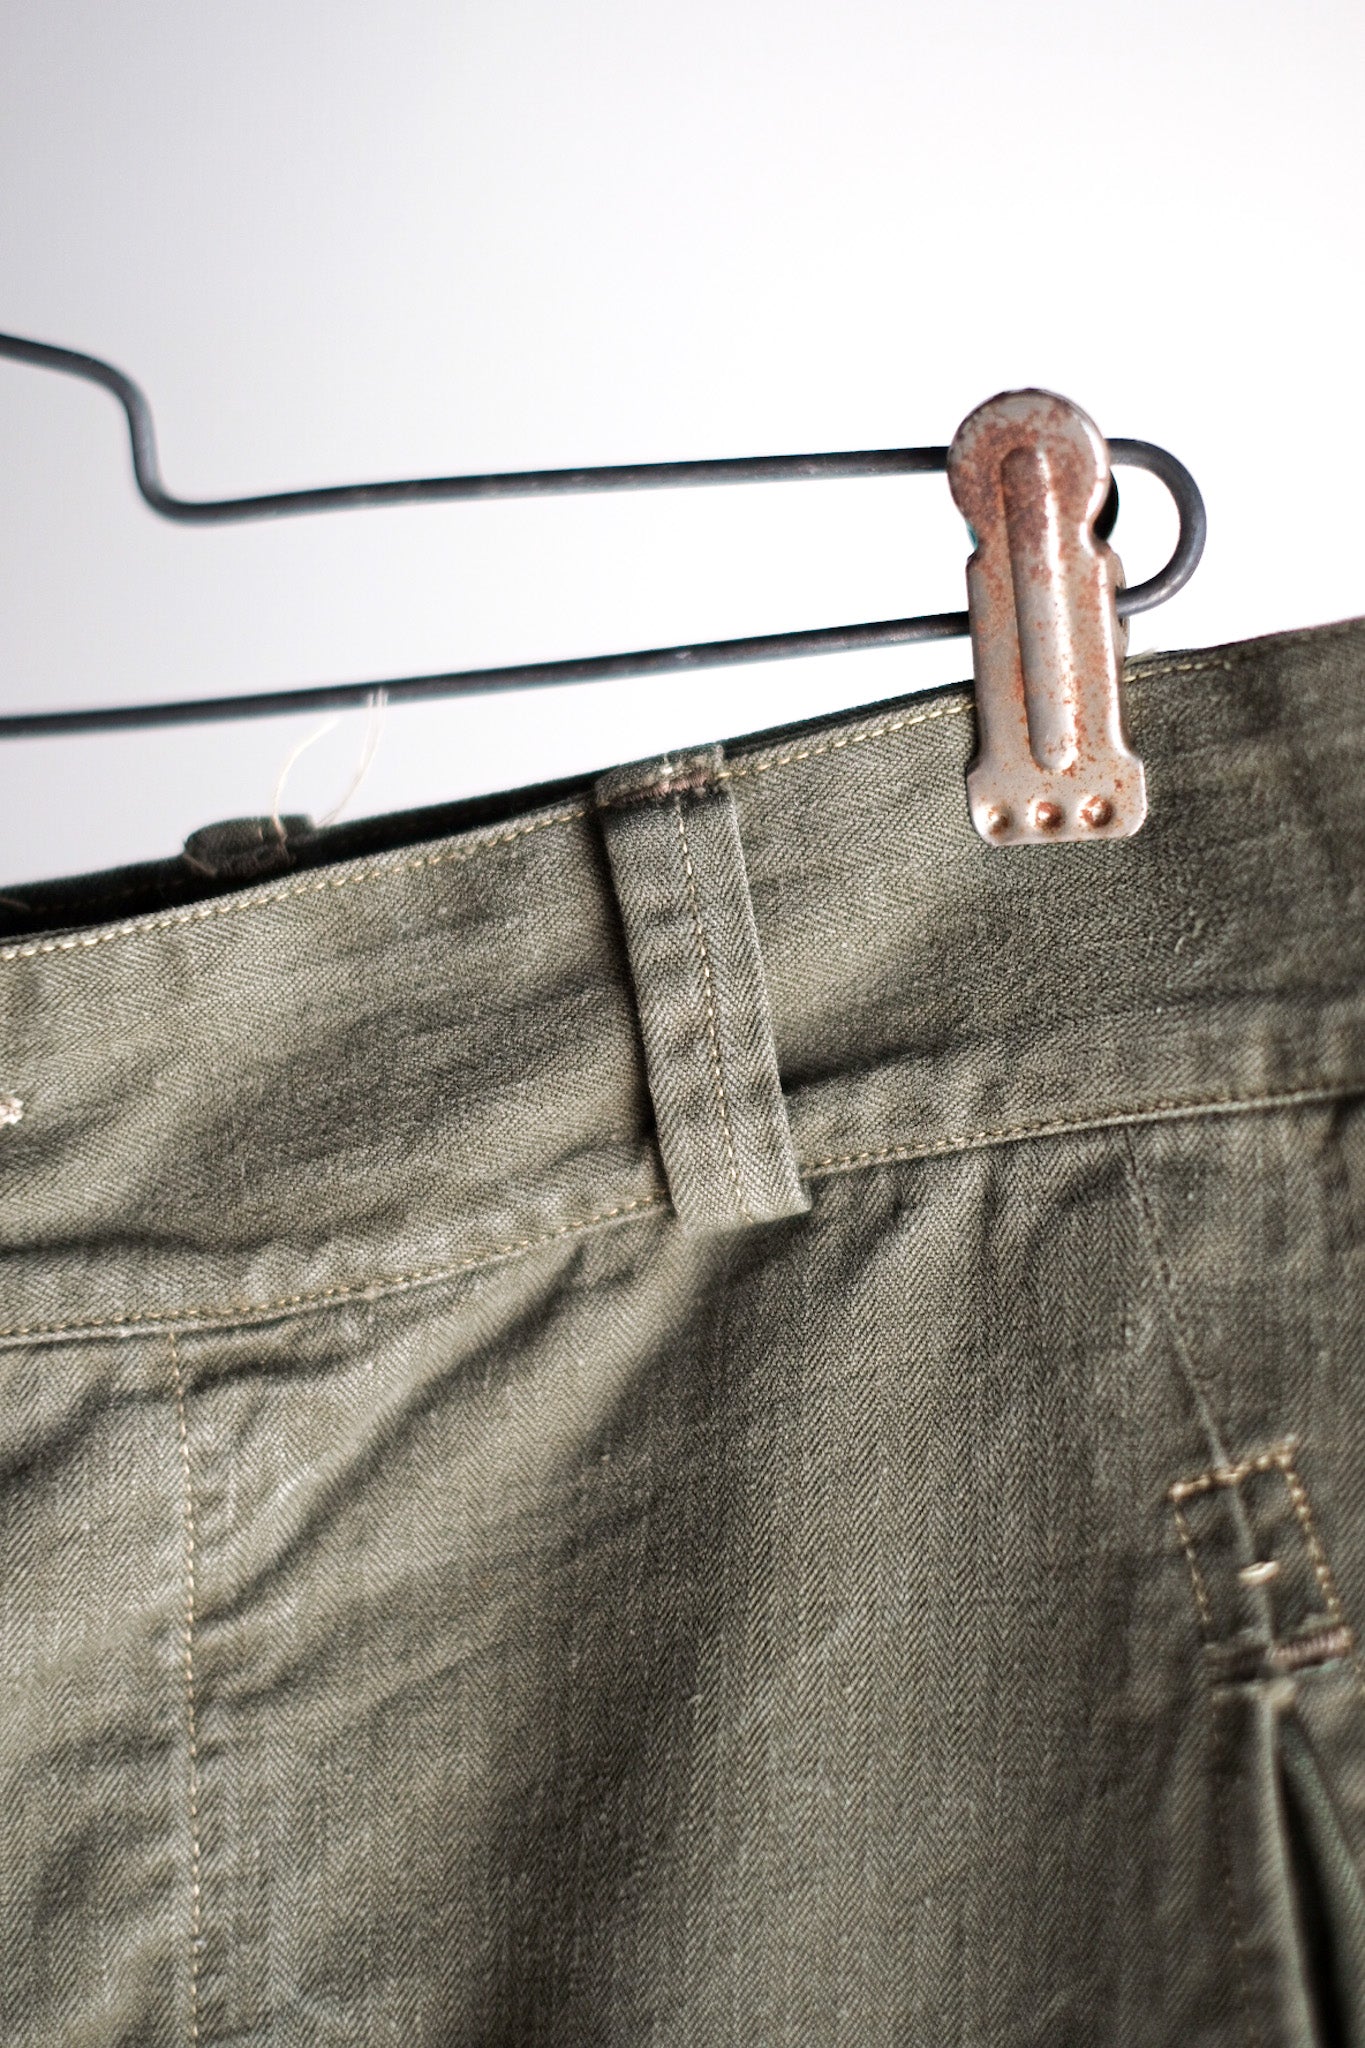 【~60's】French Army M47 Field Trousers Size.11